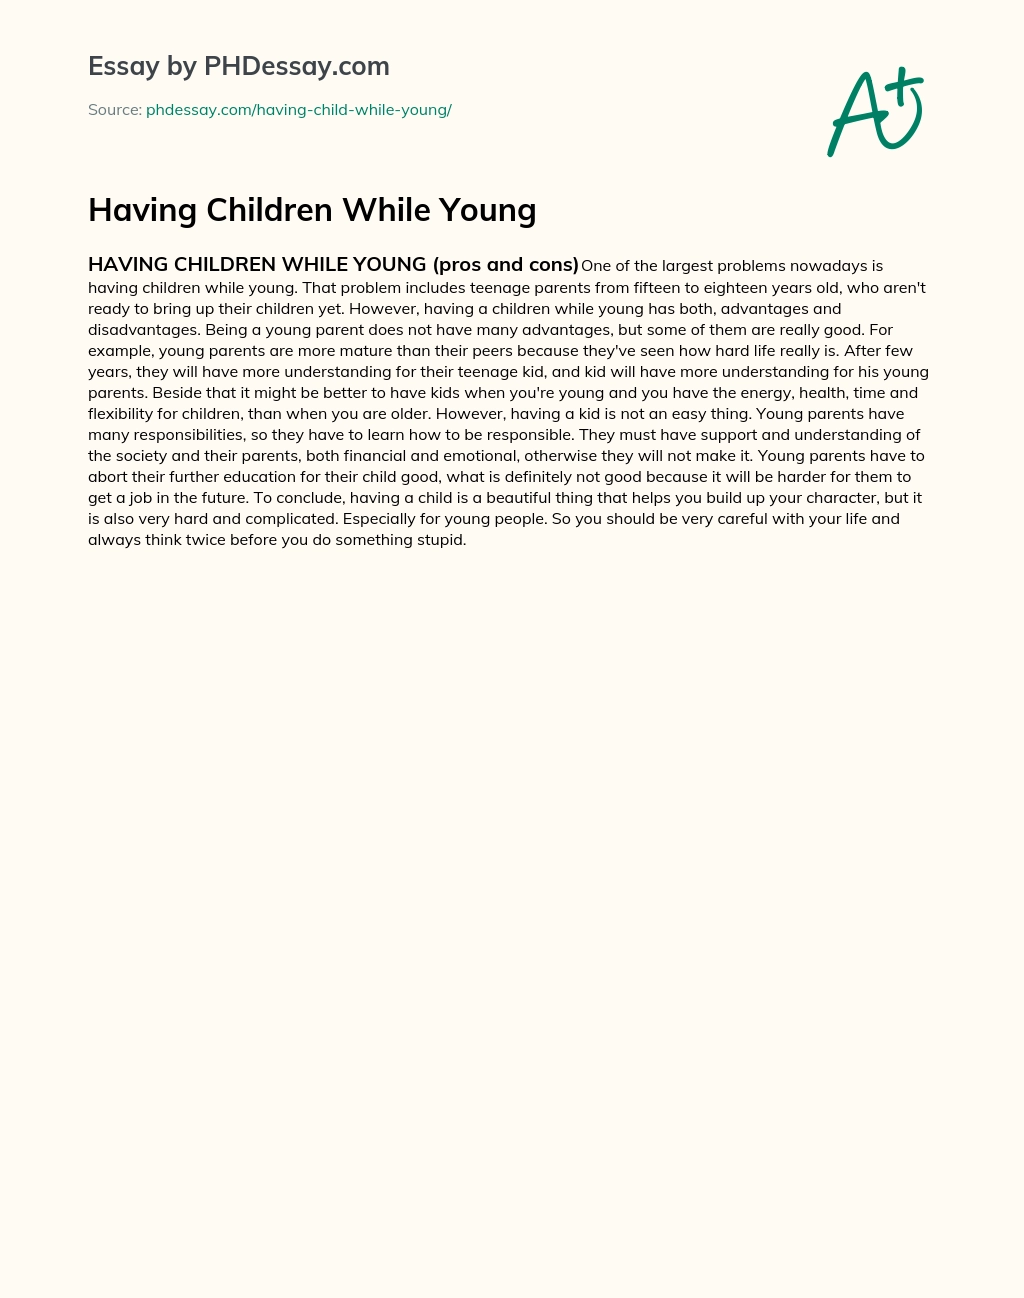 Having Children While Young essay